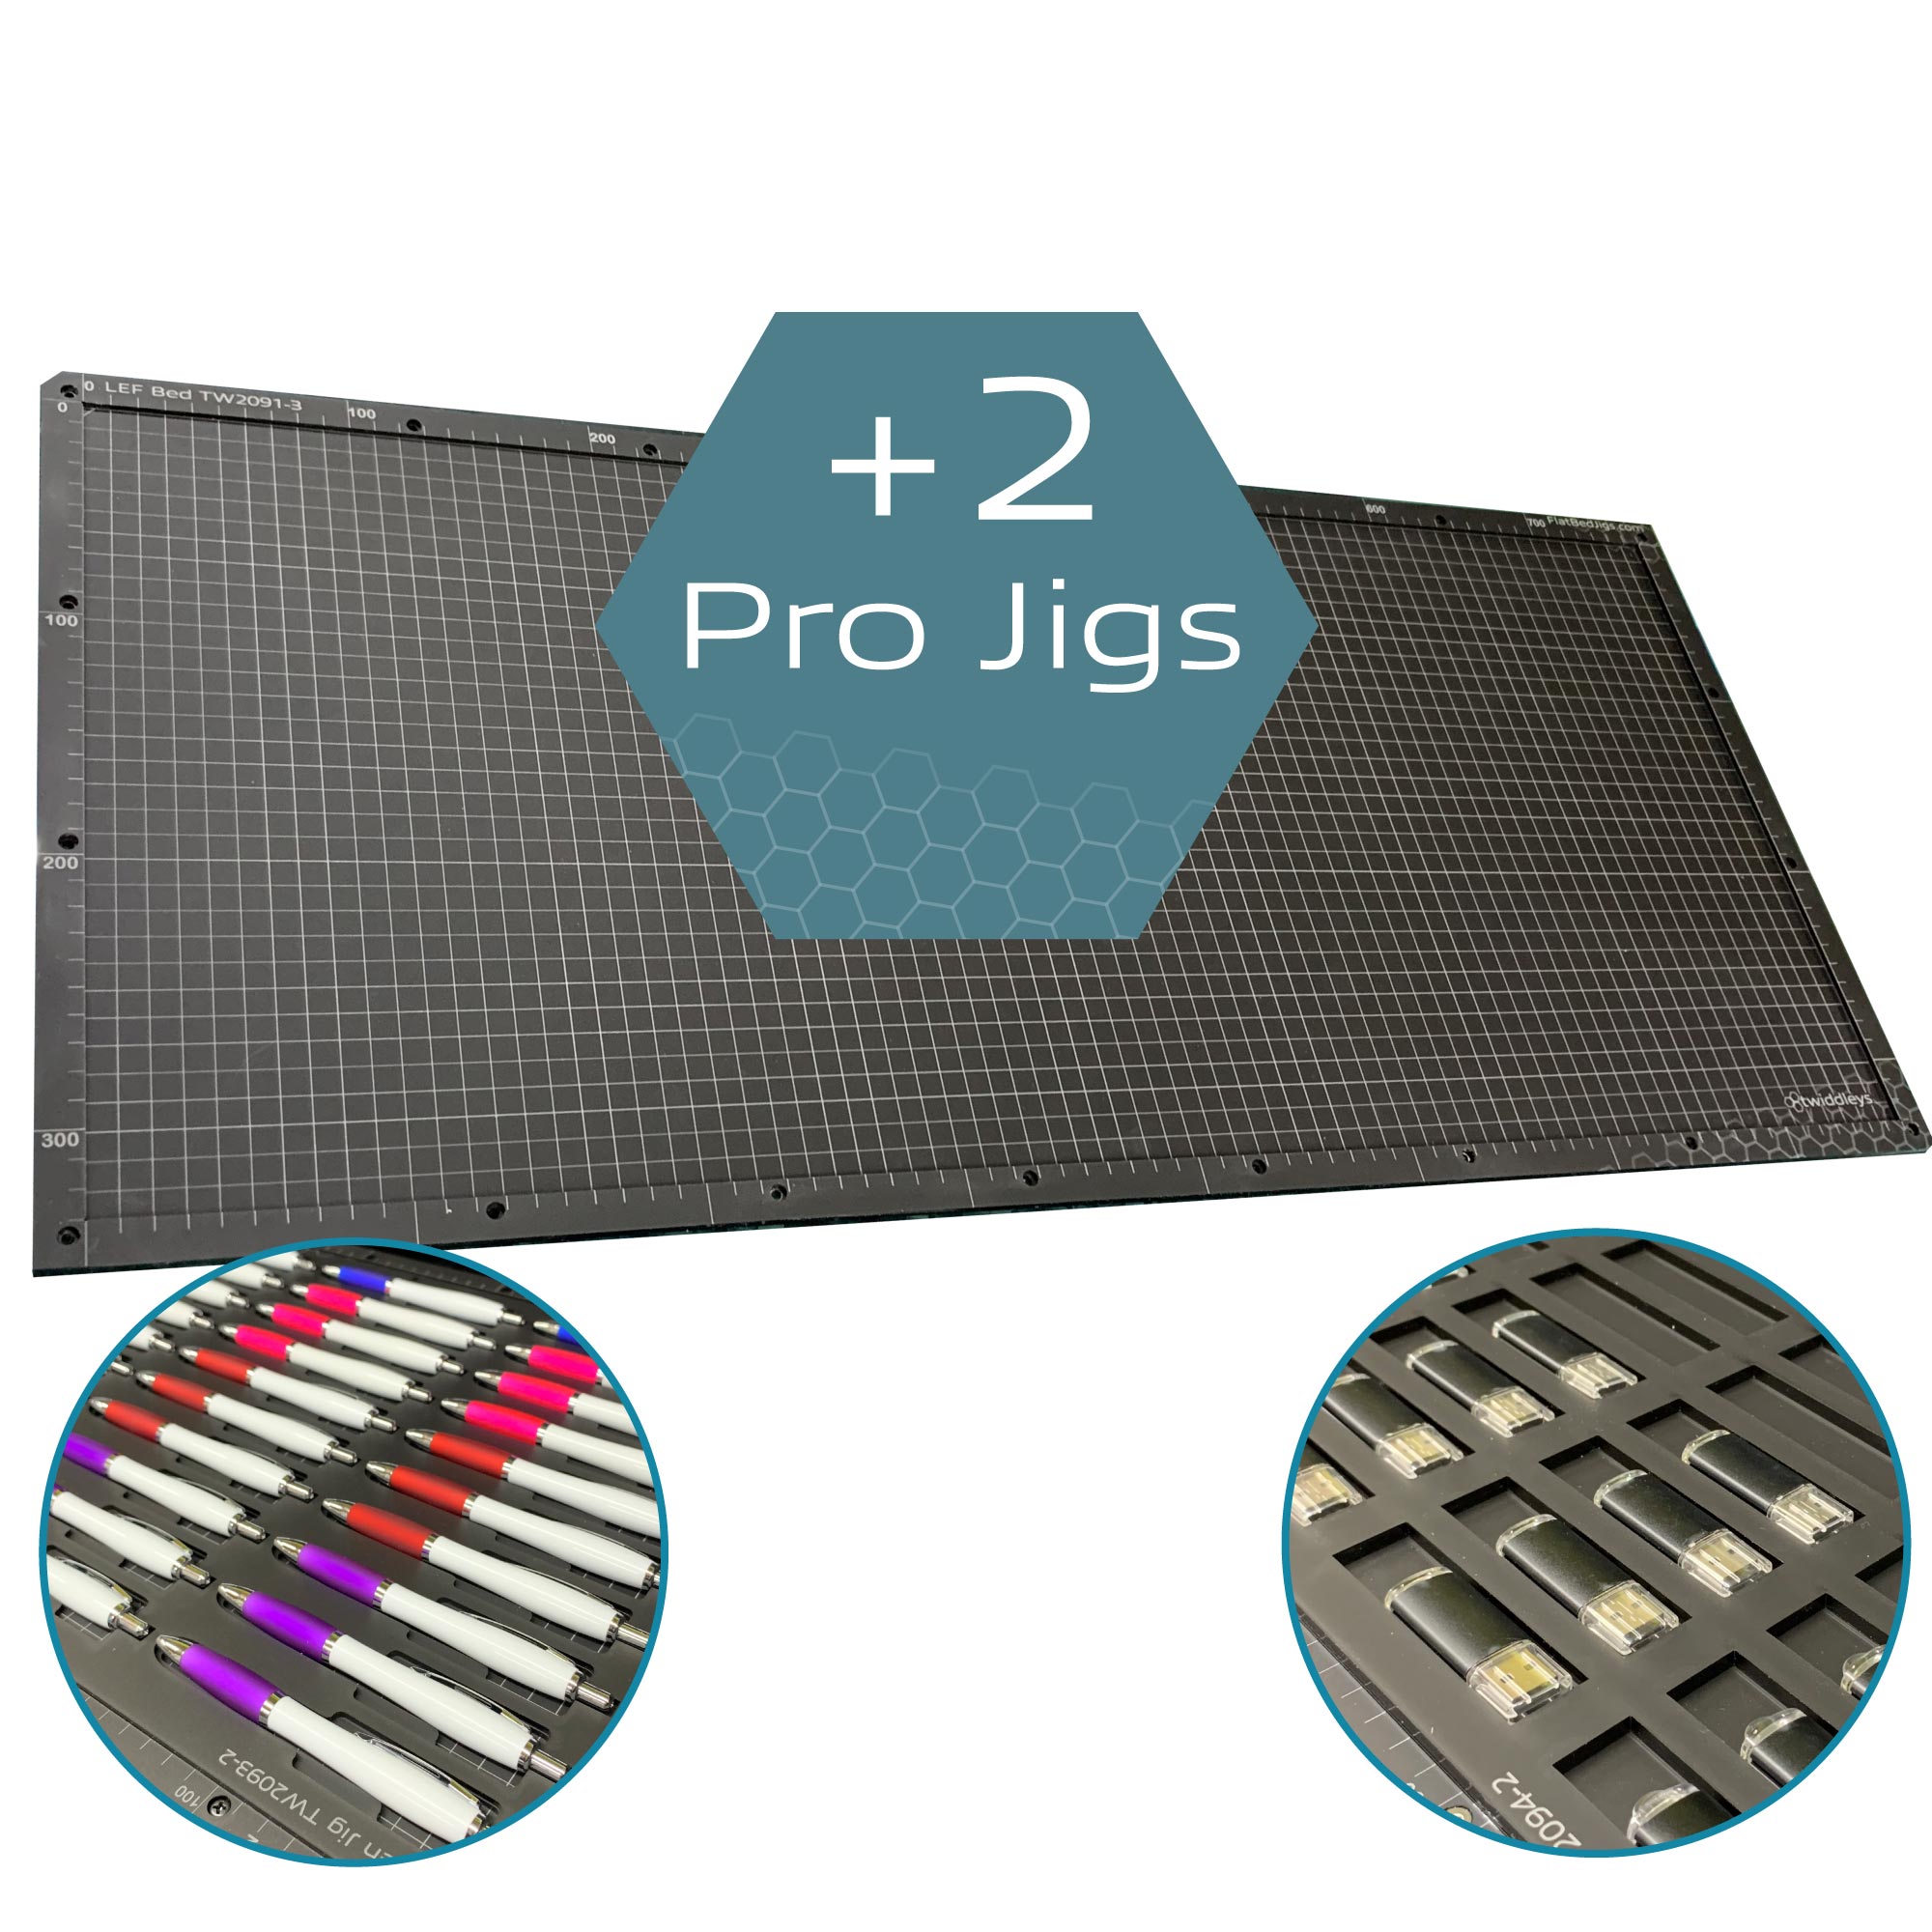 Mimaki Bundle UJF-6042 with Bed Base & Ruler Guide + 2 Pro Jigs